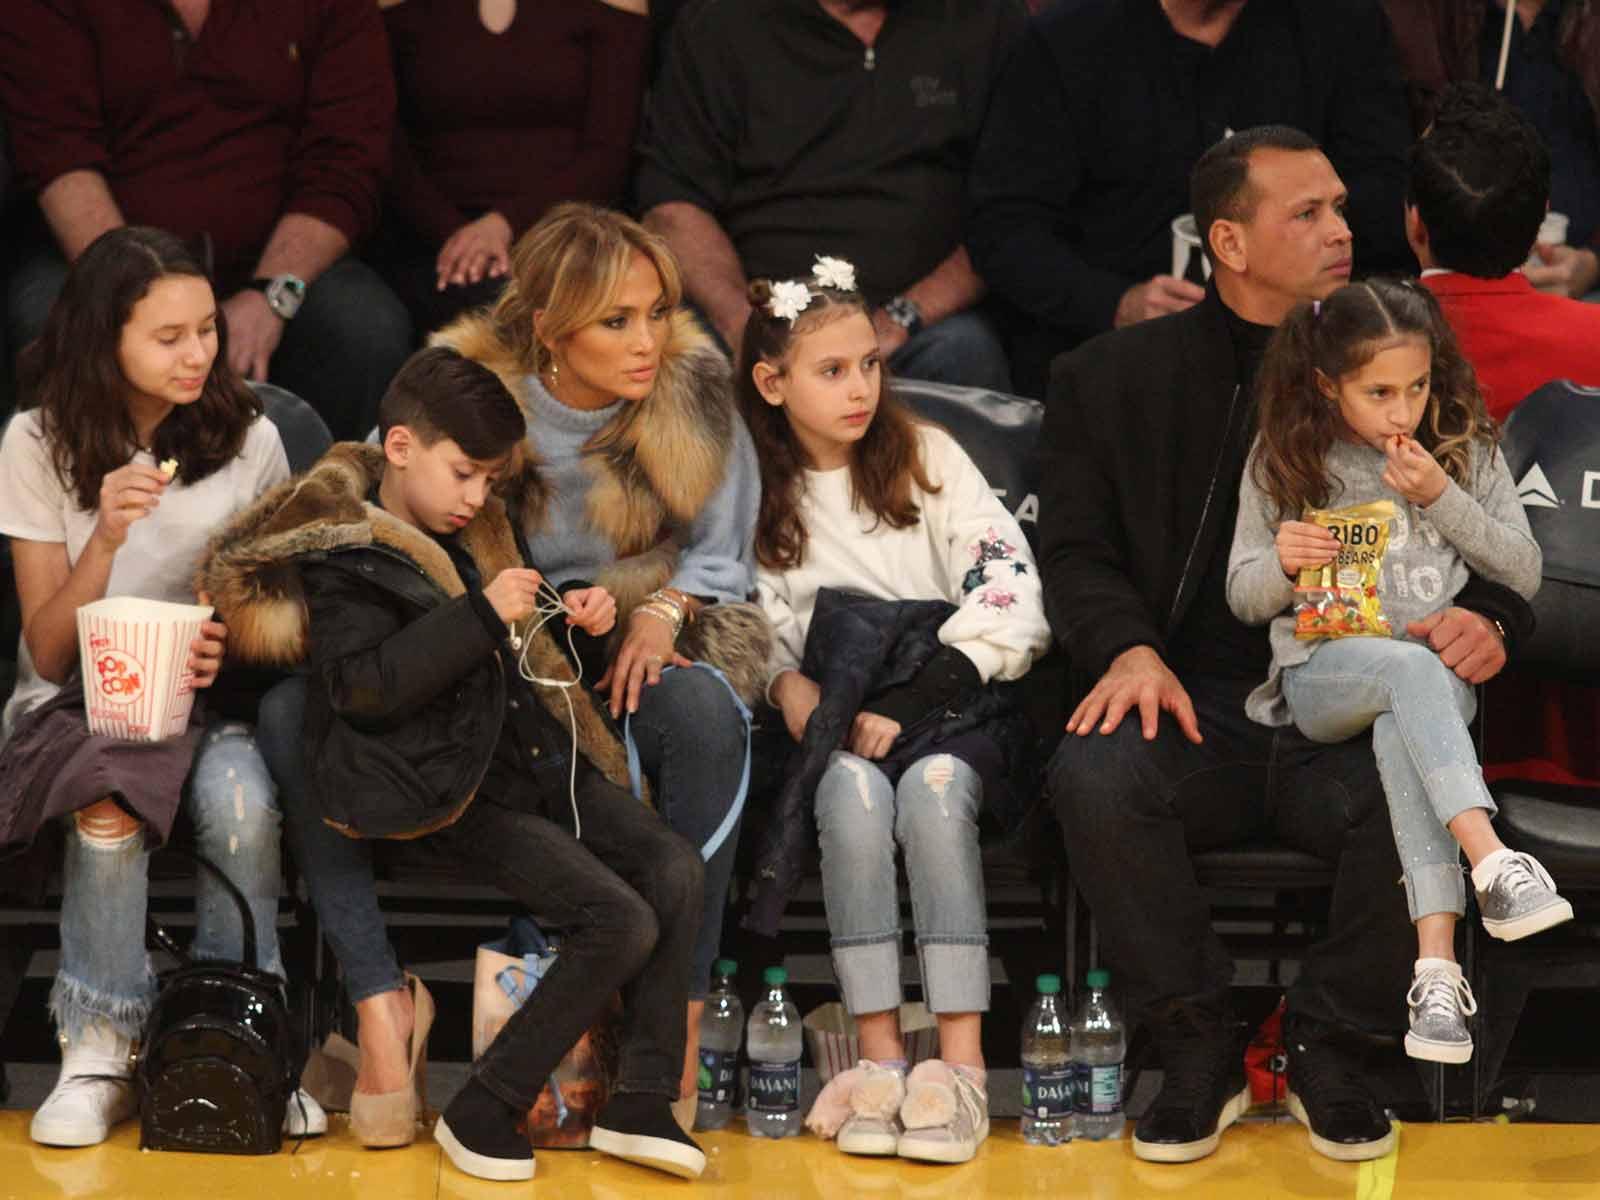 Jennifer Lopez and Alex Rodriguez Have Family Night Out at the Lakers Game